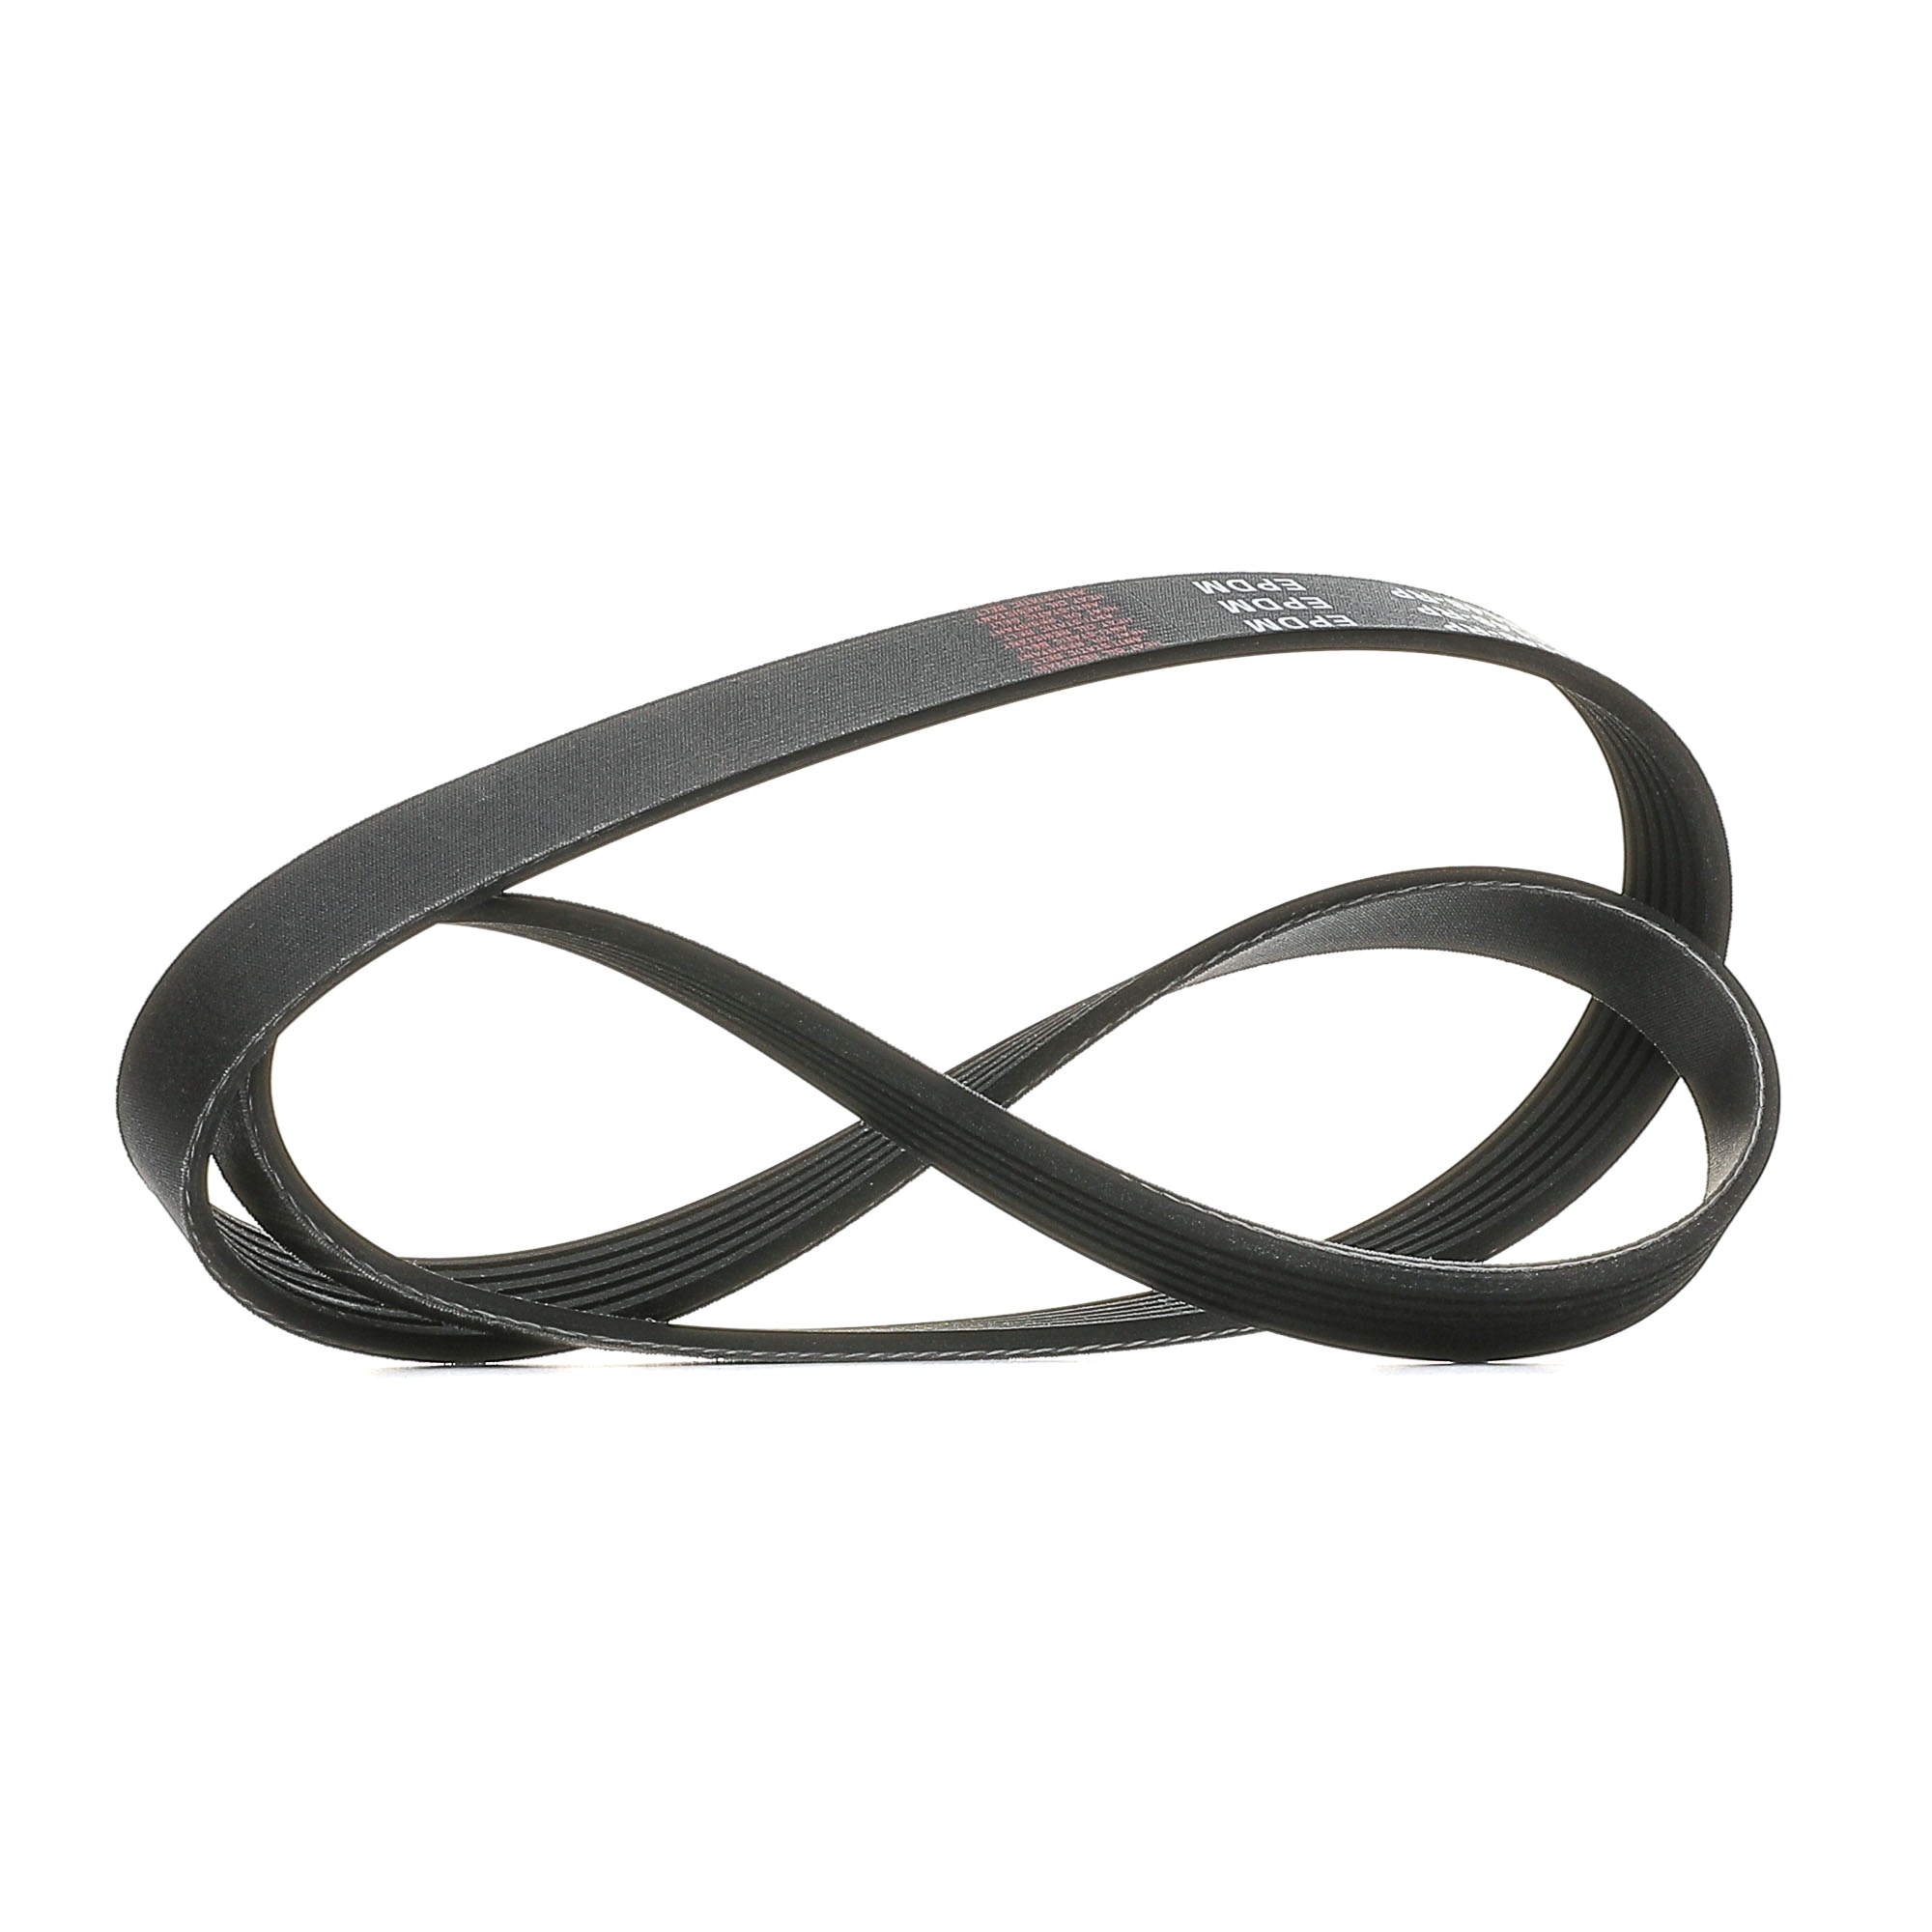 Image of RIDEX PLUS V-ribbed belt VW,OPEL,FORD 305P0061P 5750C9,5750J6,5750PC Serpentine belt,Auxiliary belt,Poly V-belt,Ribbed belt,Multi V-belt,Poly belt